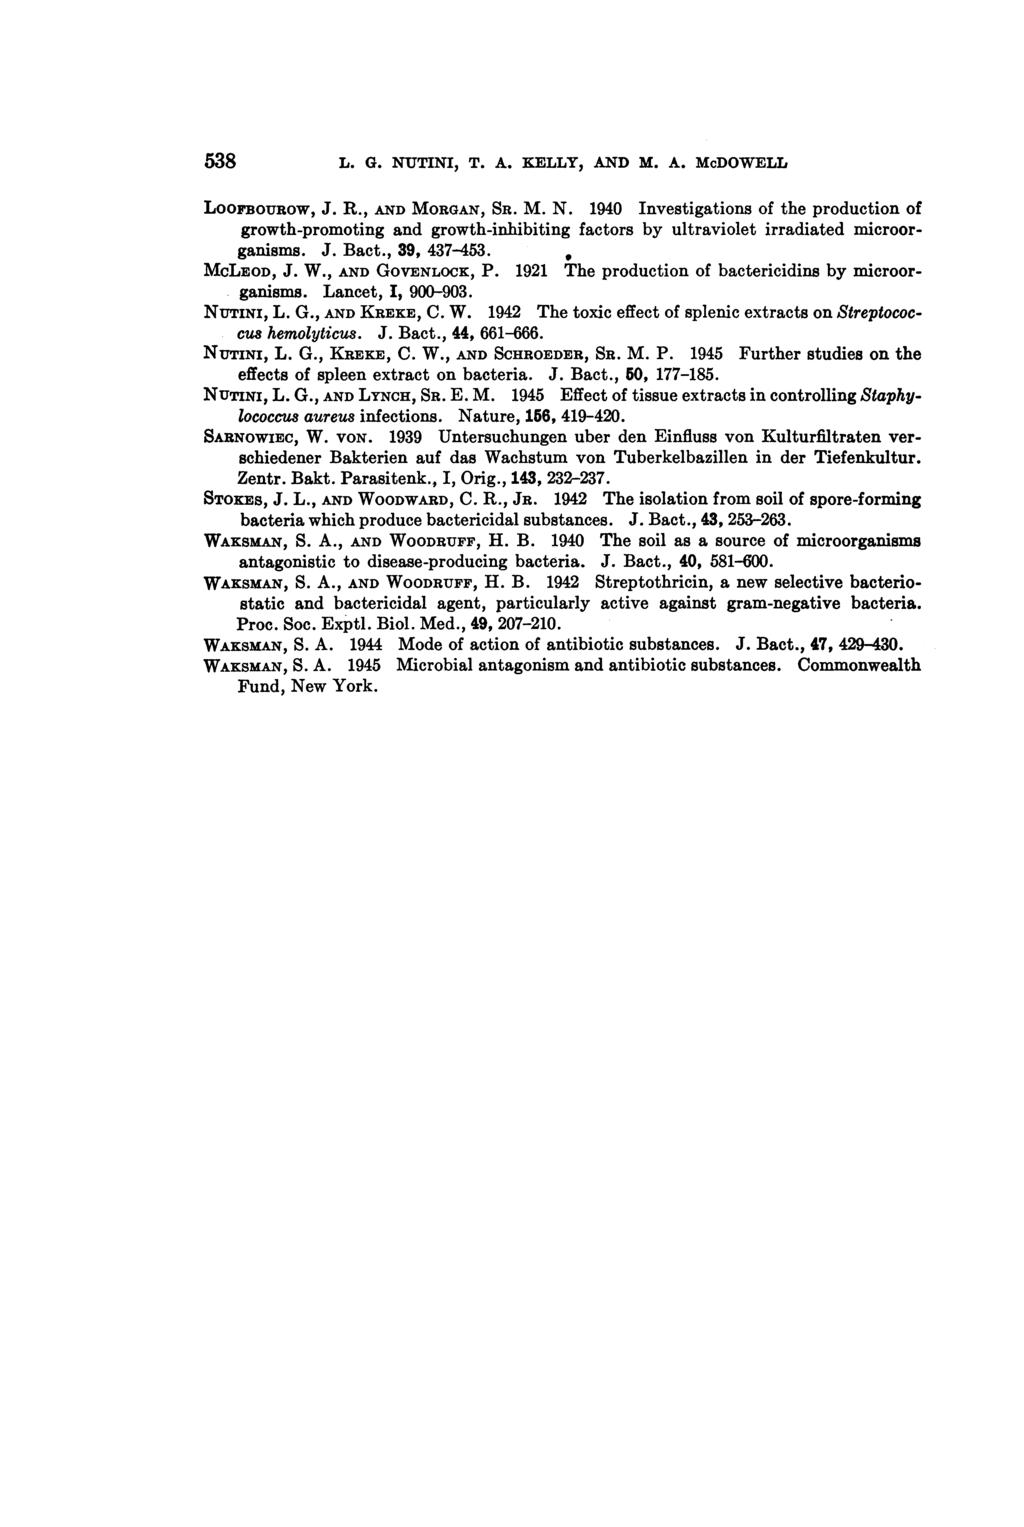 538 L. G. NUTINI, T. A. KELLY, AND M. A. McDOWELL LOOFBOUROW, J. R., AND MORGAN, SR. M. N. 1940 Investigations of the production of growth-promoting and growth-inhibiting factors by ultraviolet irradiated microorganisms.